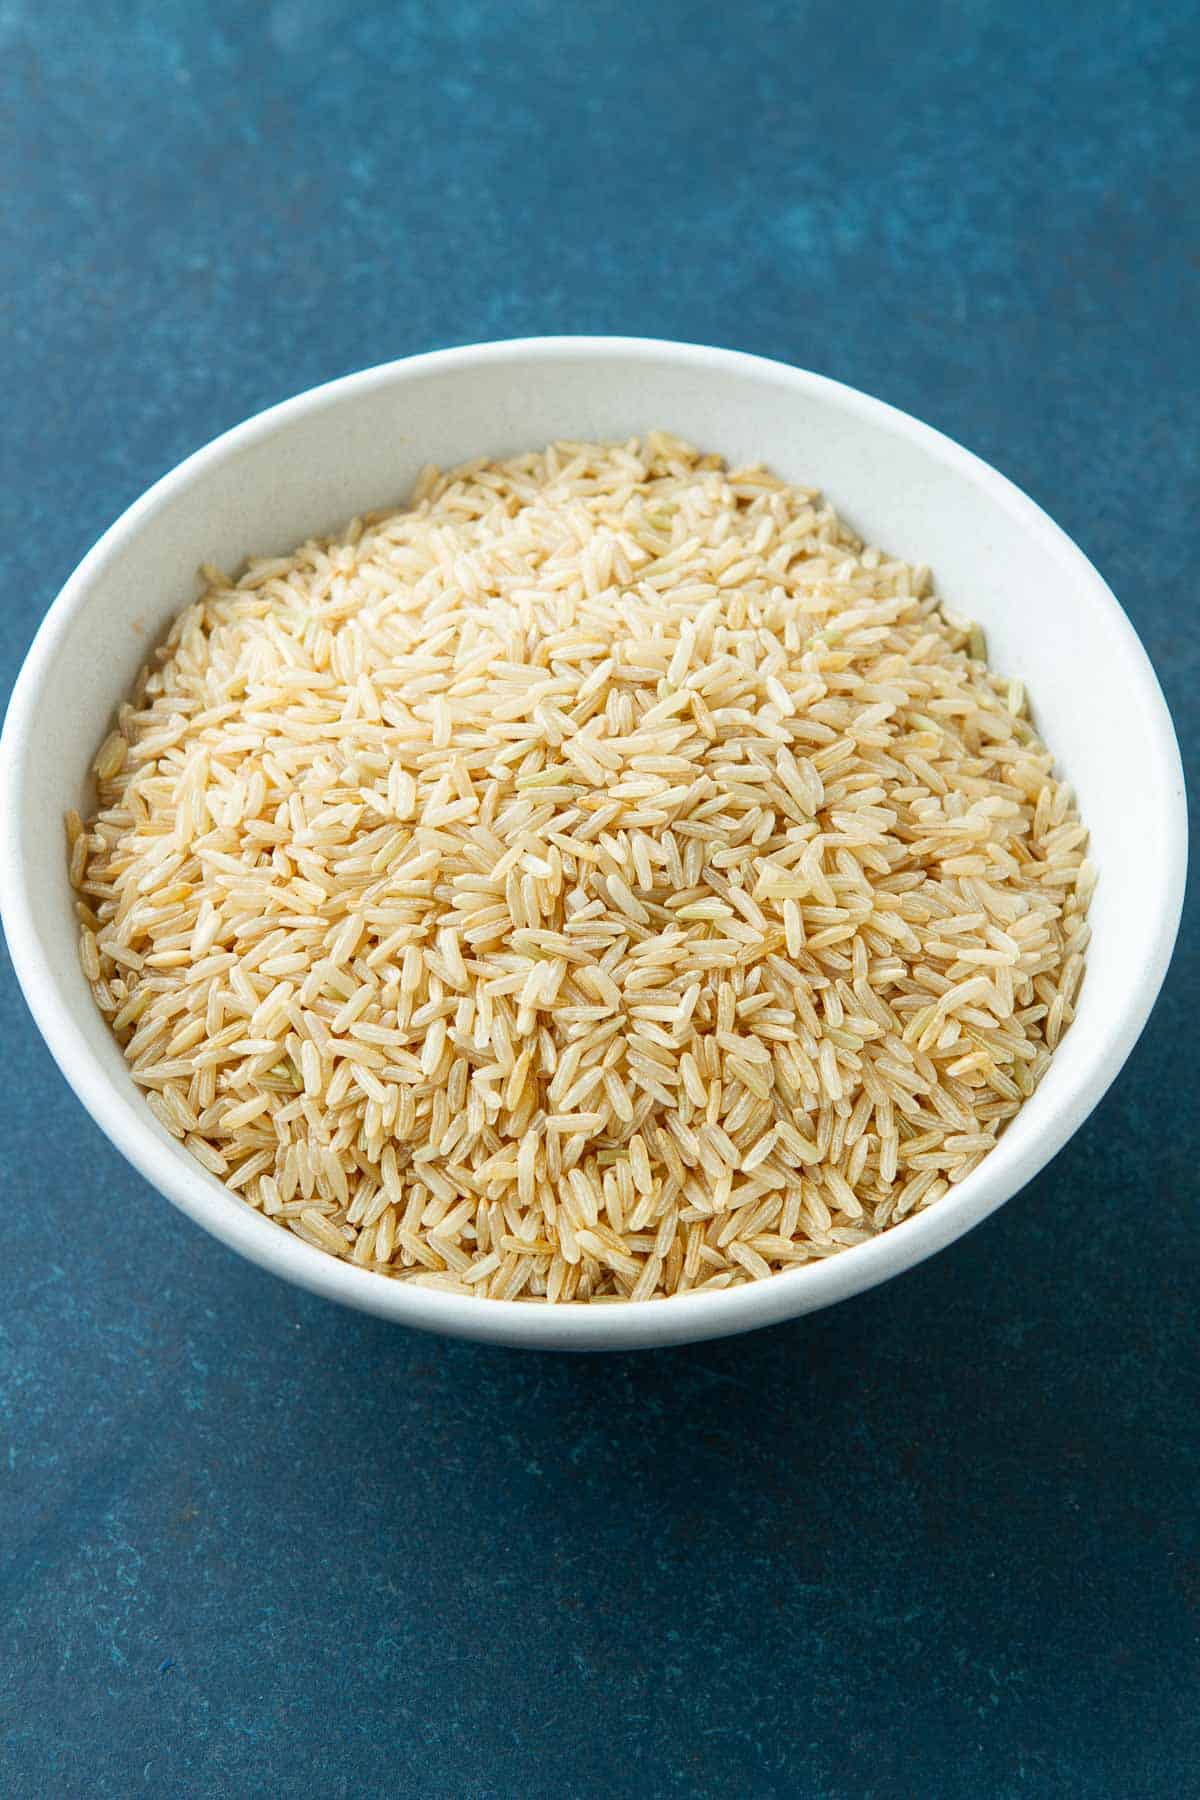 A white bowl filled with uncooked brown rice.